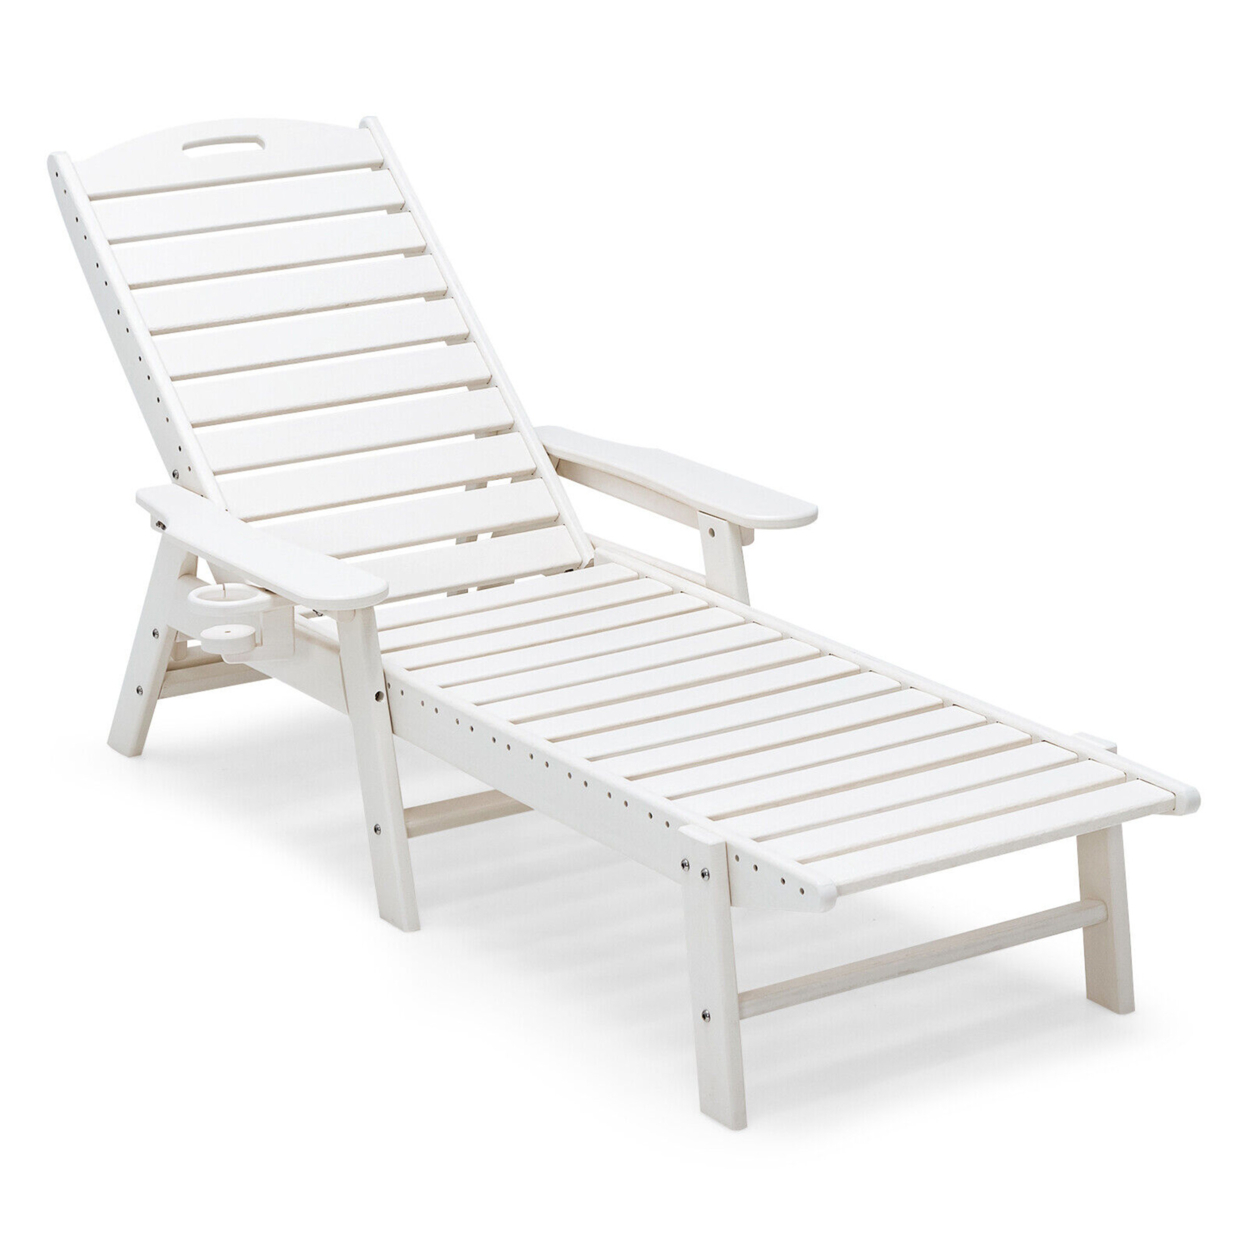 Patio Chaise Lounge HDPE Reclining Chair W/ 5-Position Adjustable Backrest & Cup Holder